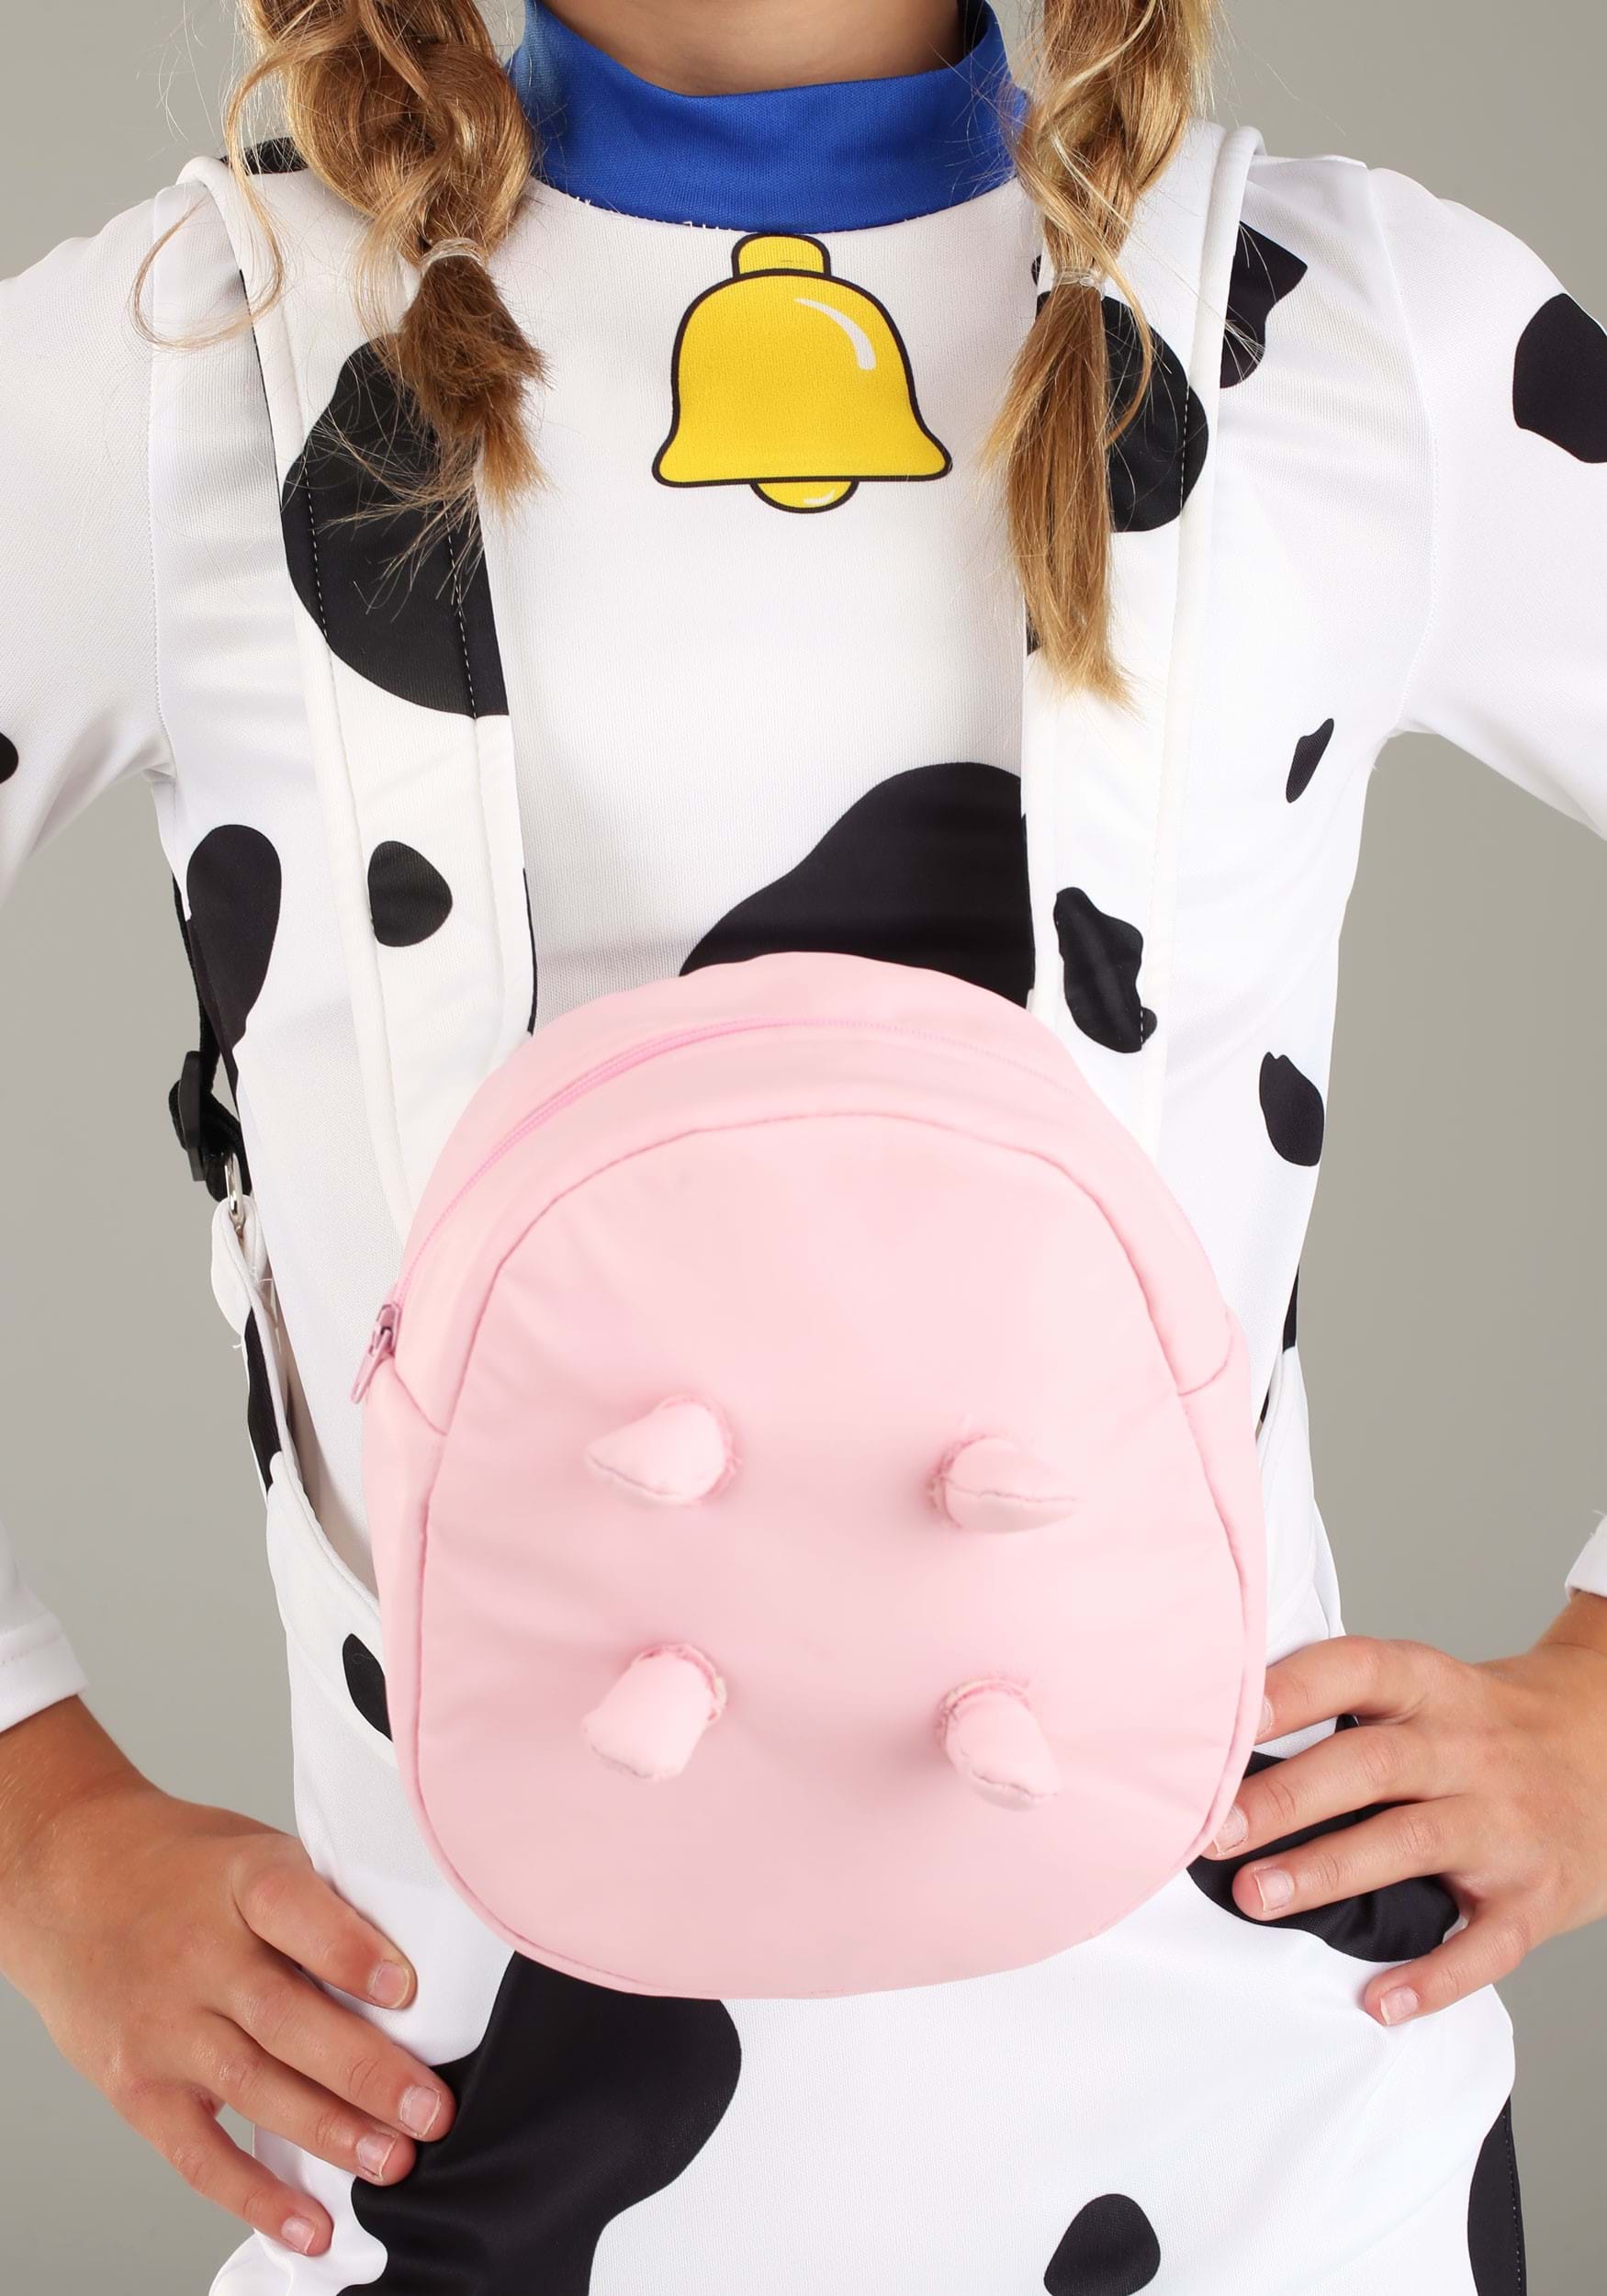 Kid's Country Cow Exclusive Halloween Costume